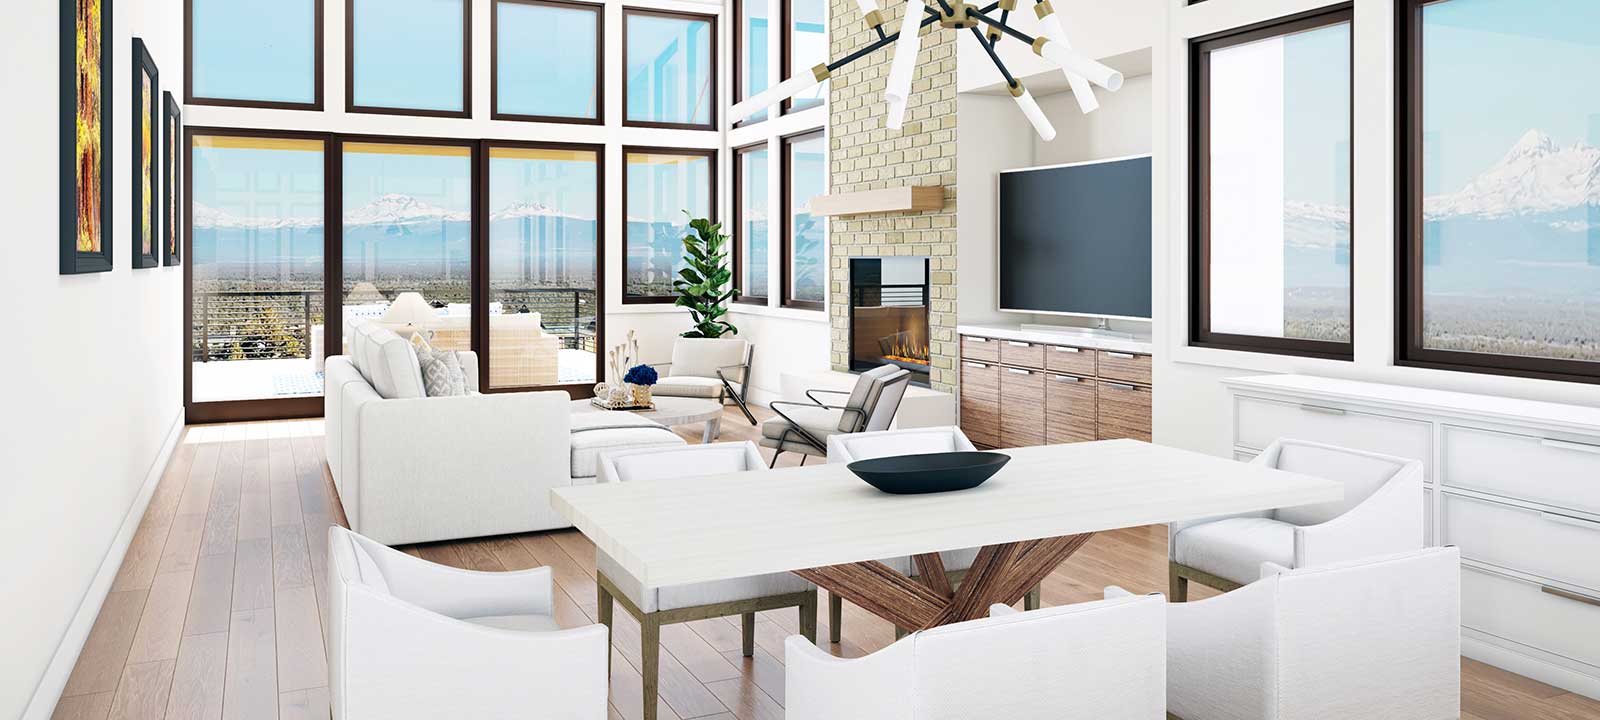 Aspen Living Room - Shown with upgraded finishes